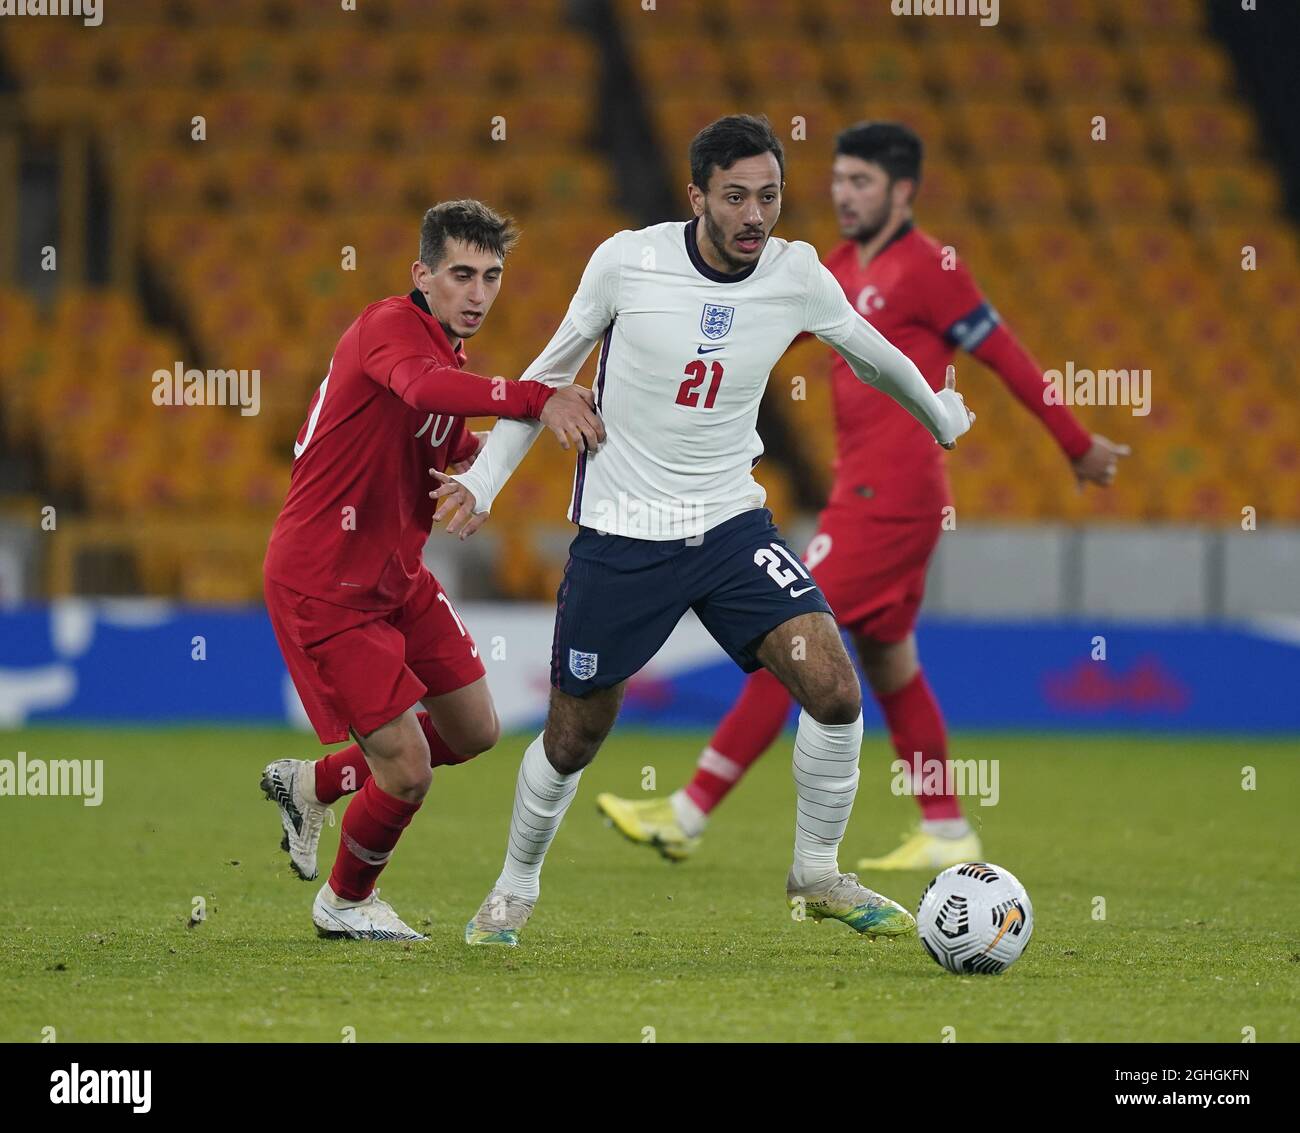 Dwight Marshall of England and Ravil Tagir of Turkey during the UEFA Euro U21 Qualifying match at Molineux, Wolverhampton. Picture date: 13th October 2020. Picture credit should read: Andrew Yates/Sportimage via PA Images Stock Photo